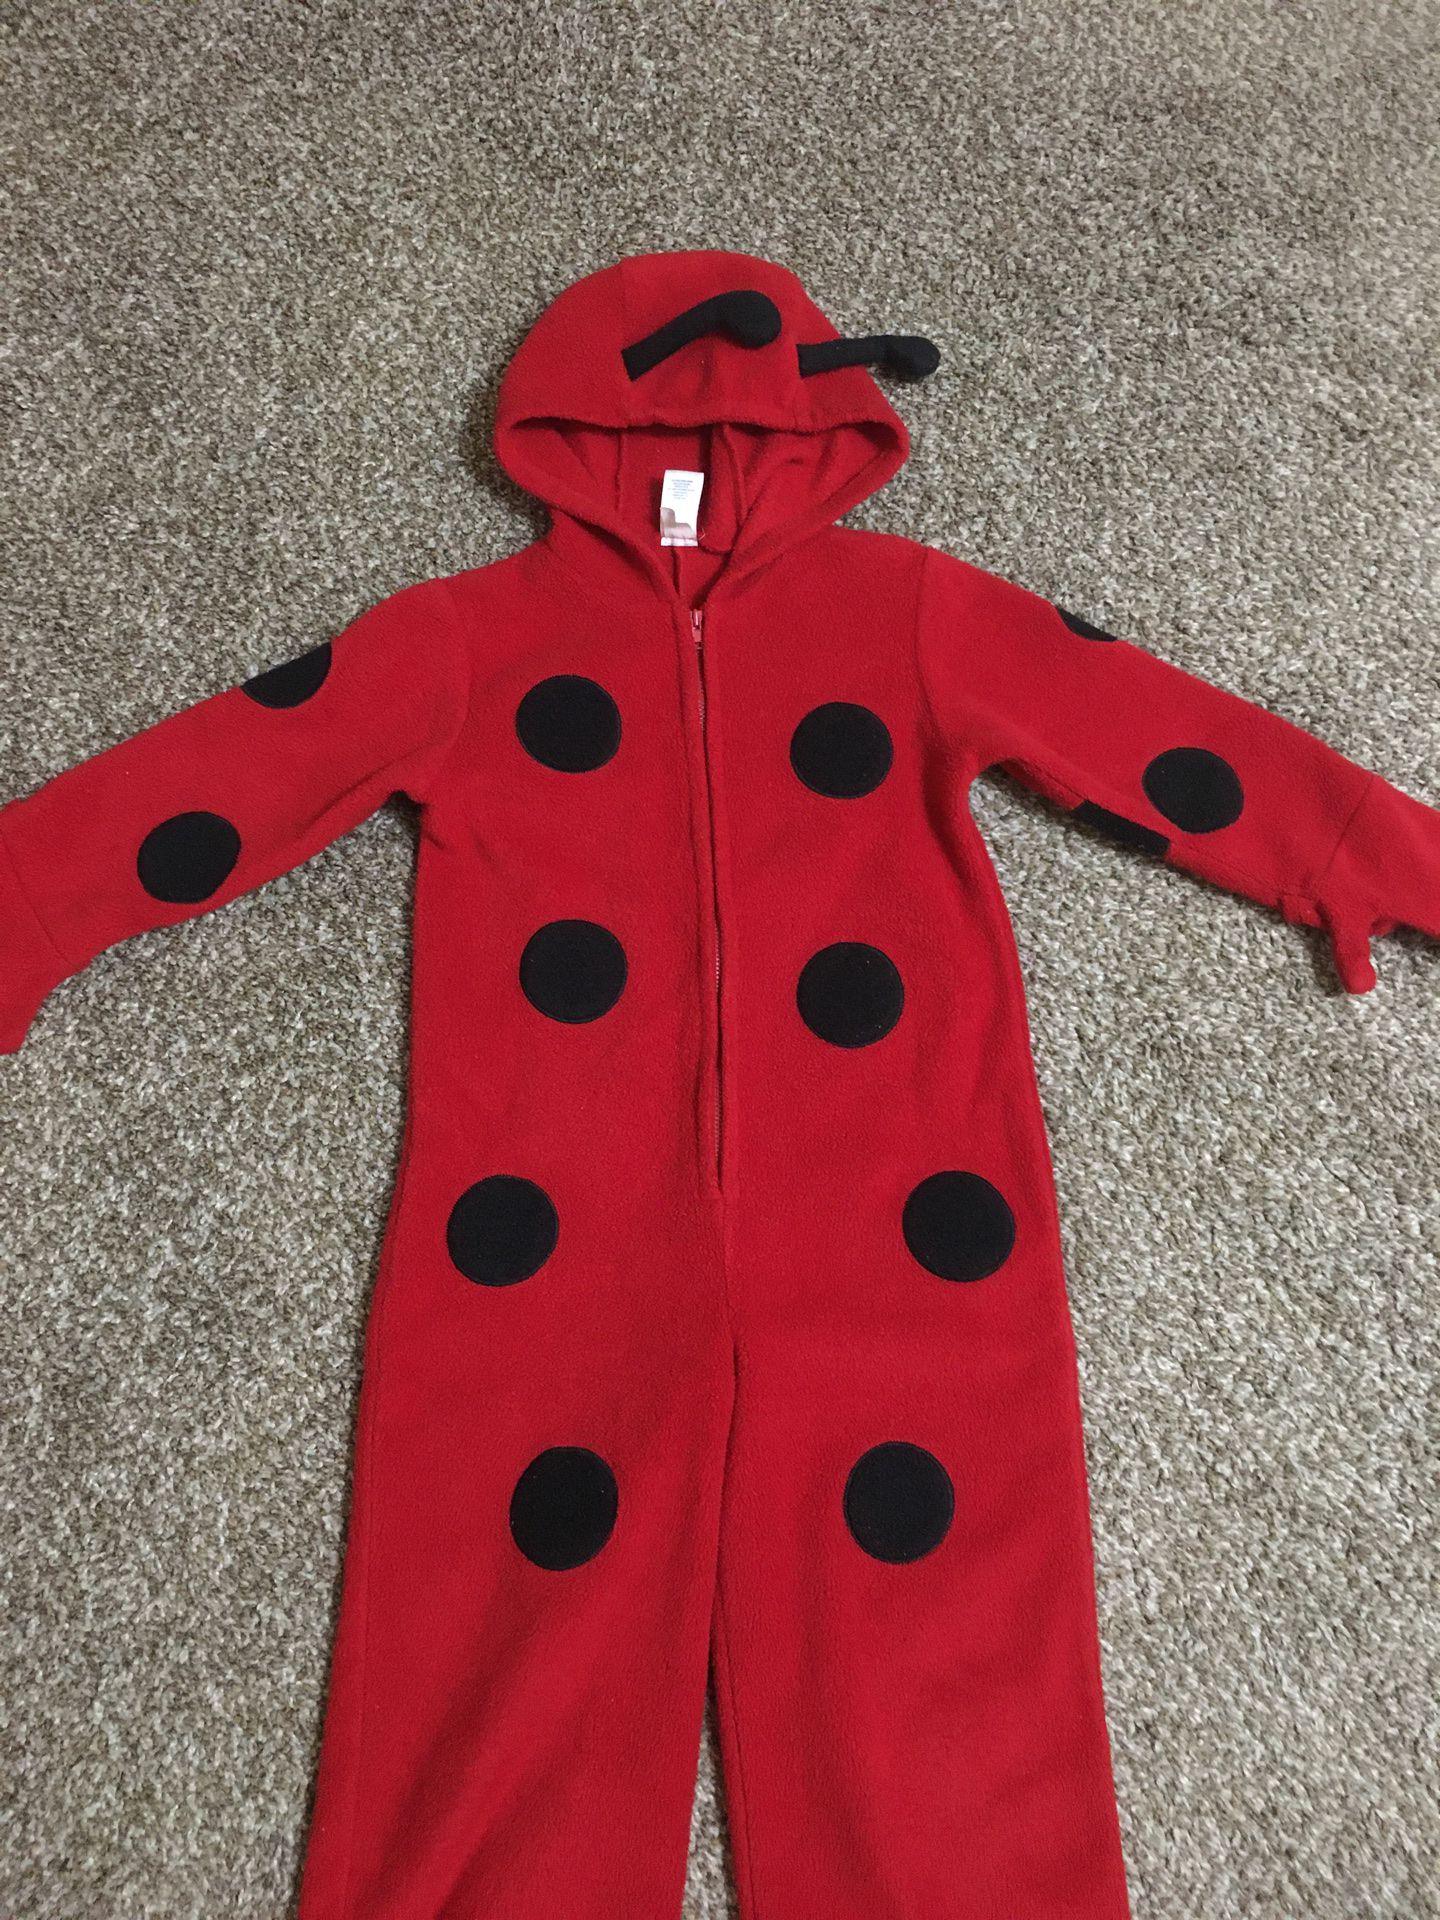 Old navy lady bug costume 4t